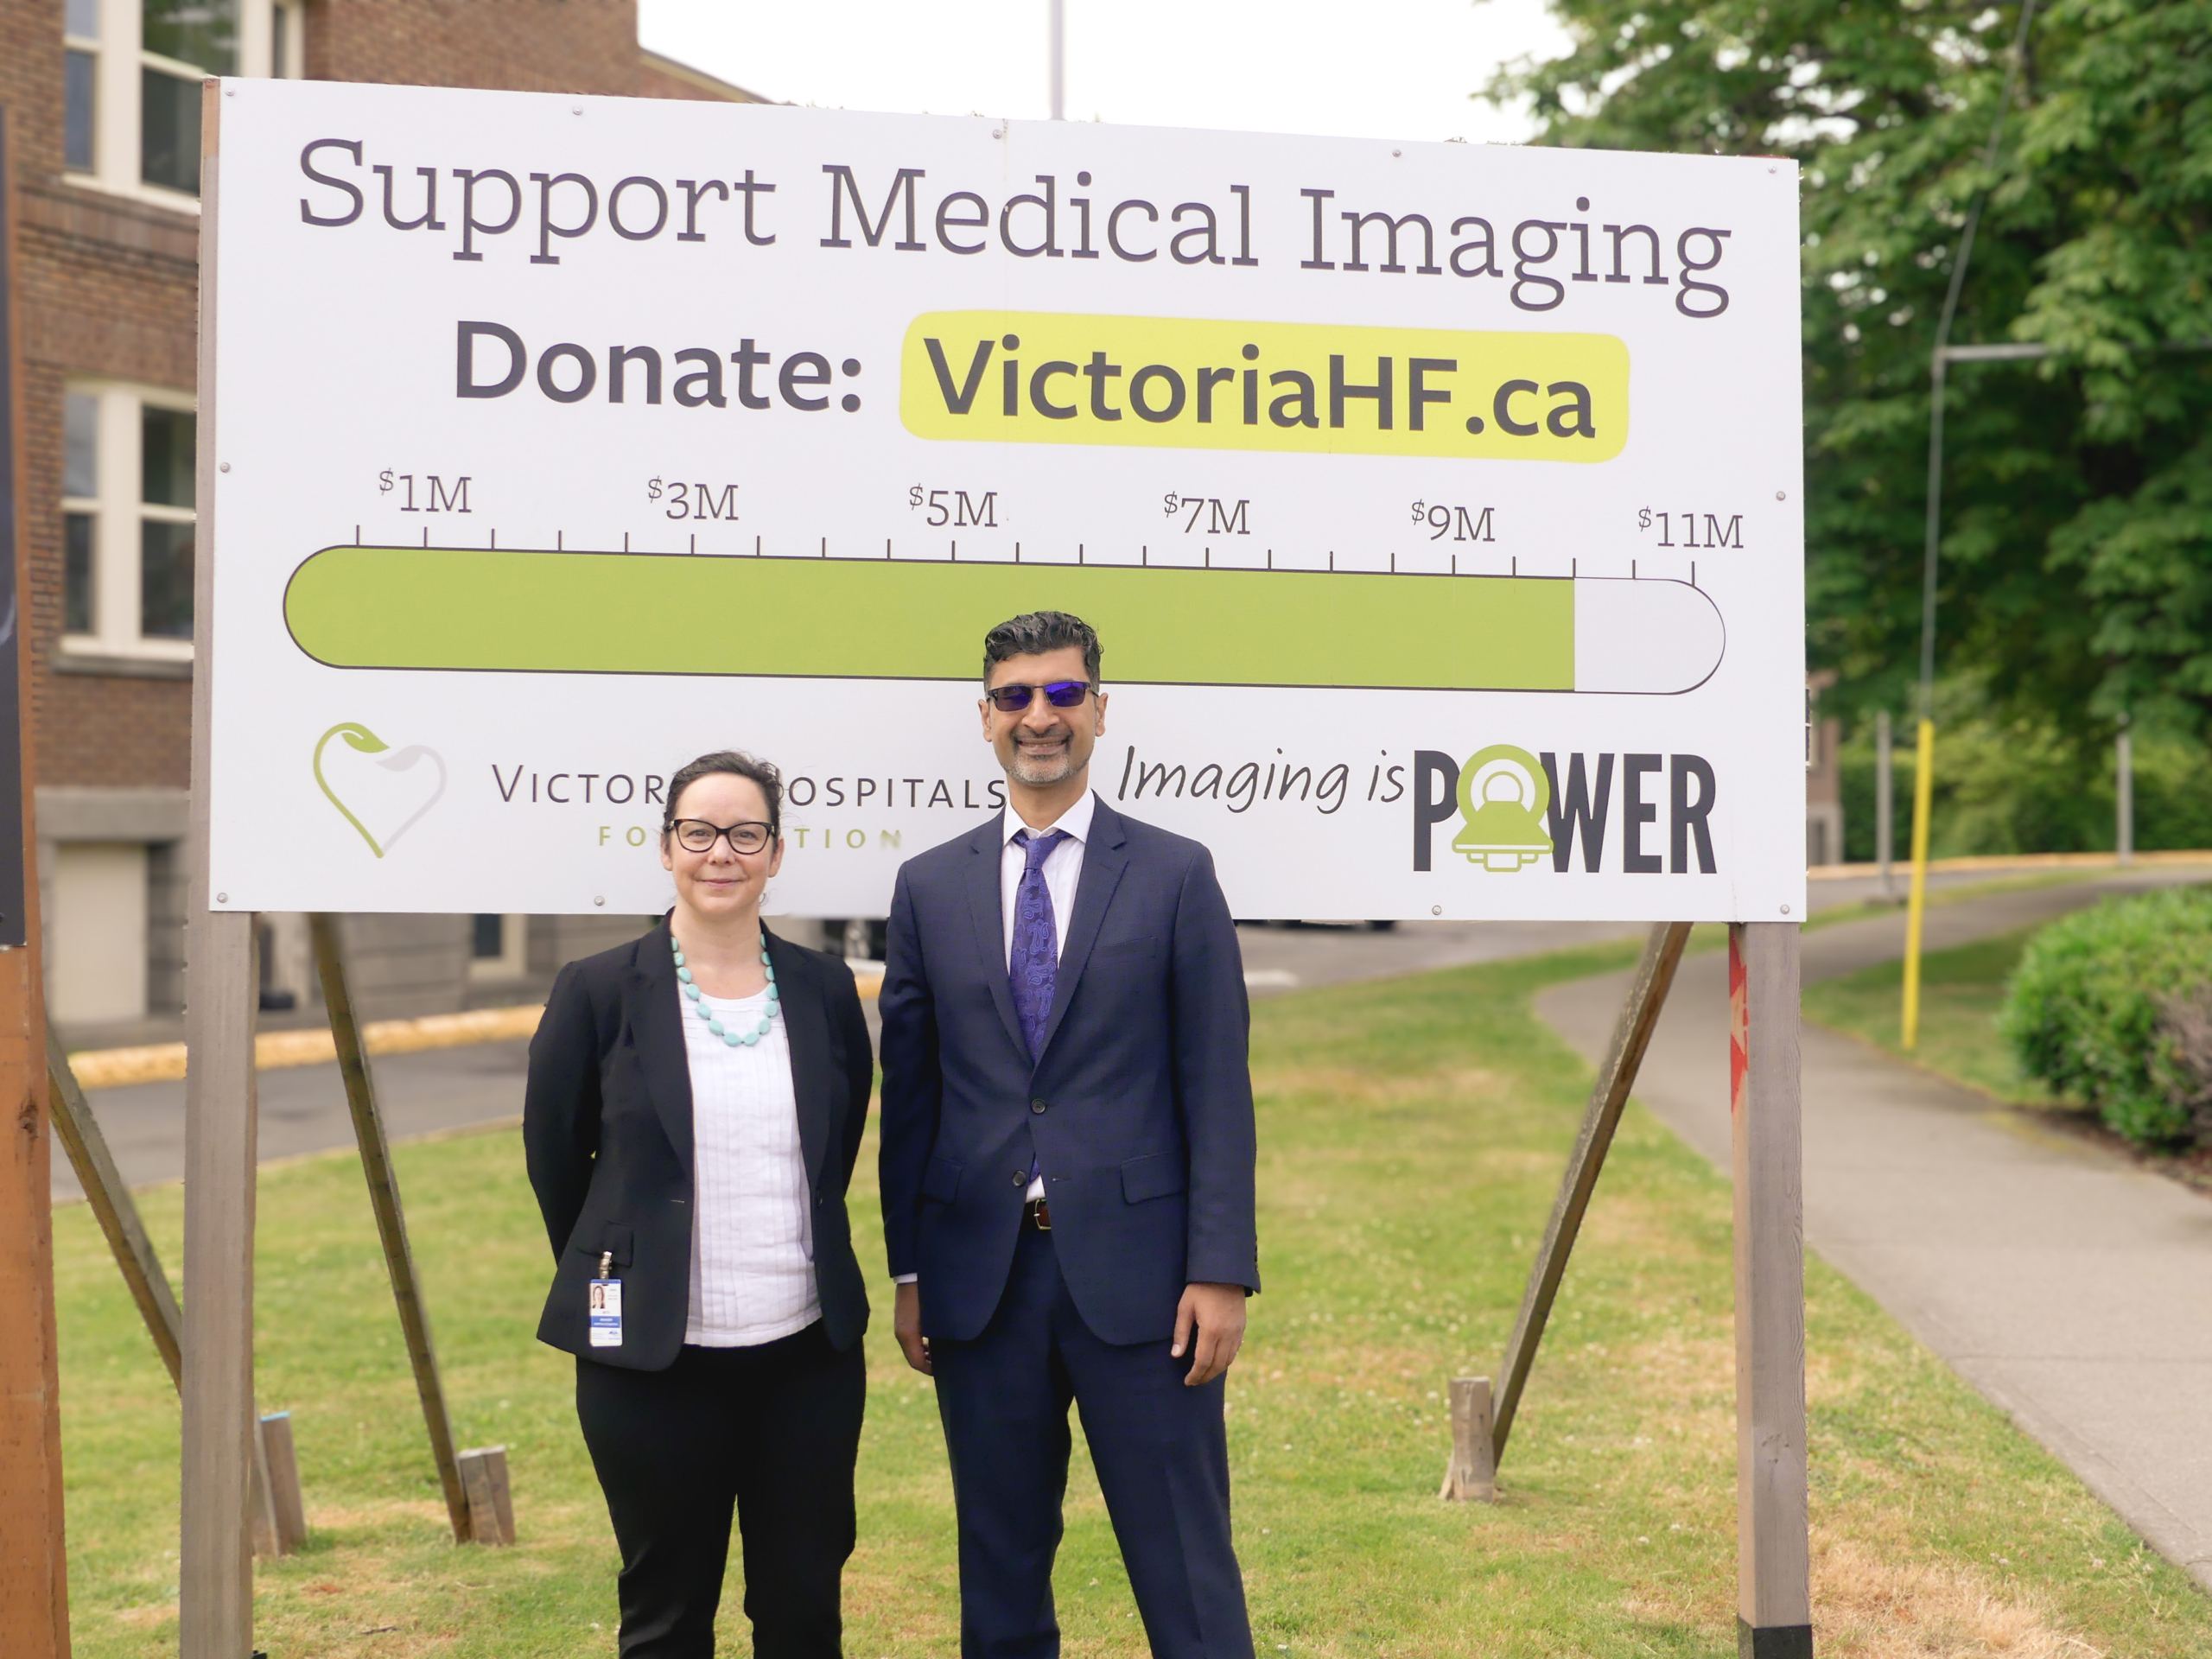 A representative from VHF & Canada Life stand together in front of the Imaging is Power Campaign thermometer sign, now showing $10 million raised